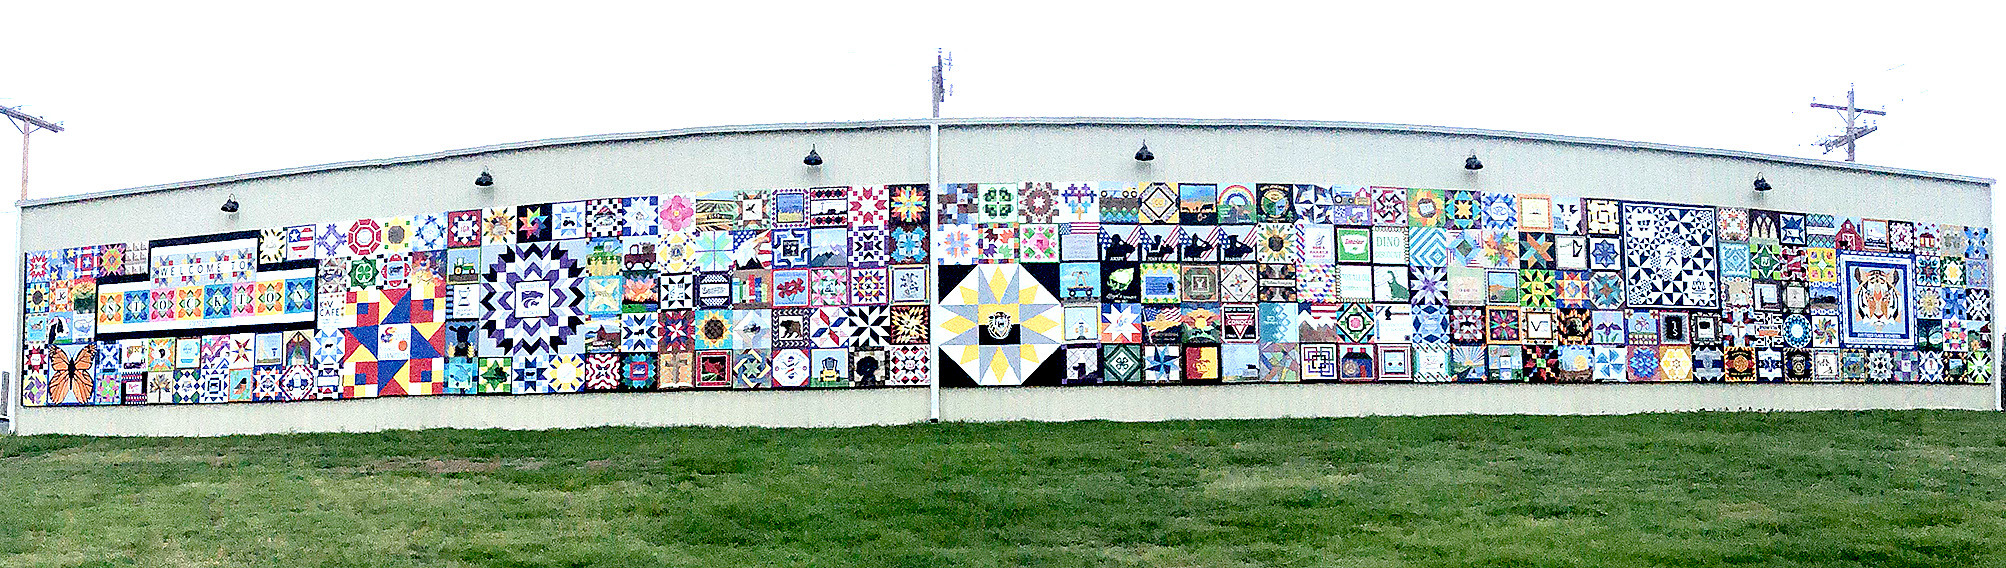 A PANORAMICVIEW of the massive Barn Quilt Mural in Stockton shows off all 295 blocks hand-painted by many community members. This finishes the project's second phase of painting and hanging all the blocks, with only the signage portion left. The final phase should be completed within the next six months.